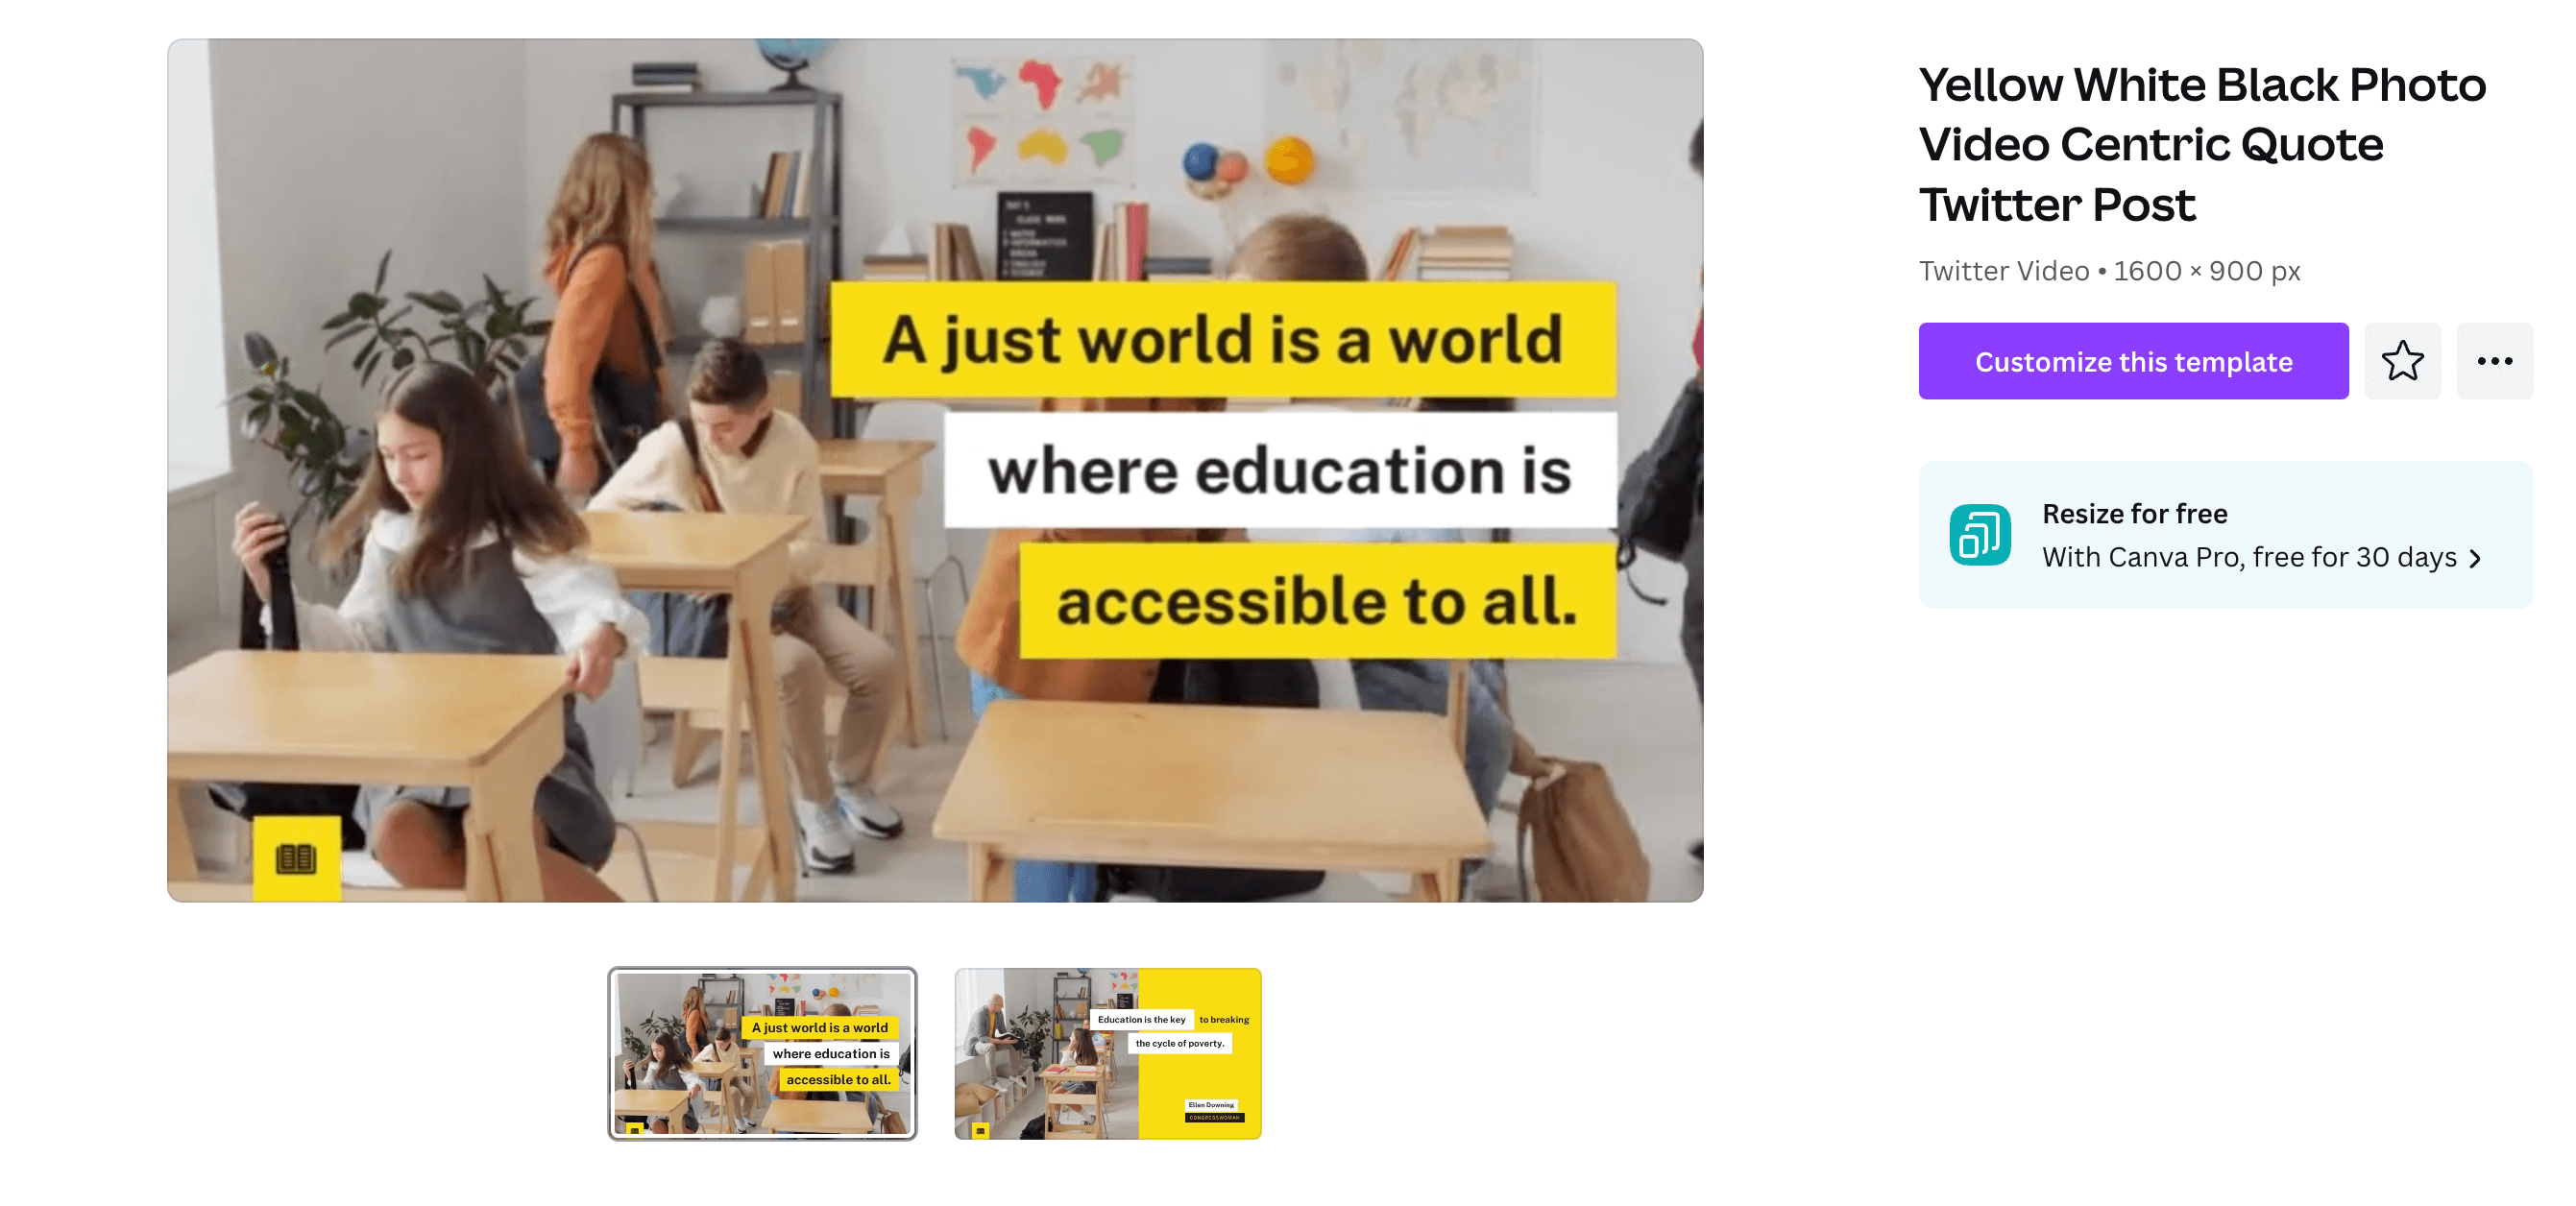 Text that reads "A just world is a world where education is accessible to all" over a video of children sitting down at desks in a classroom.